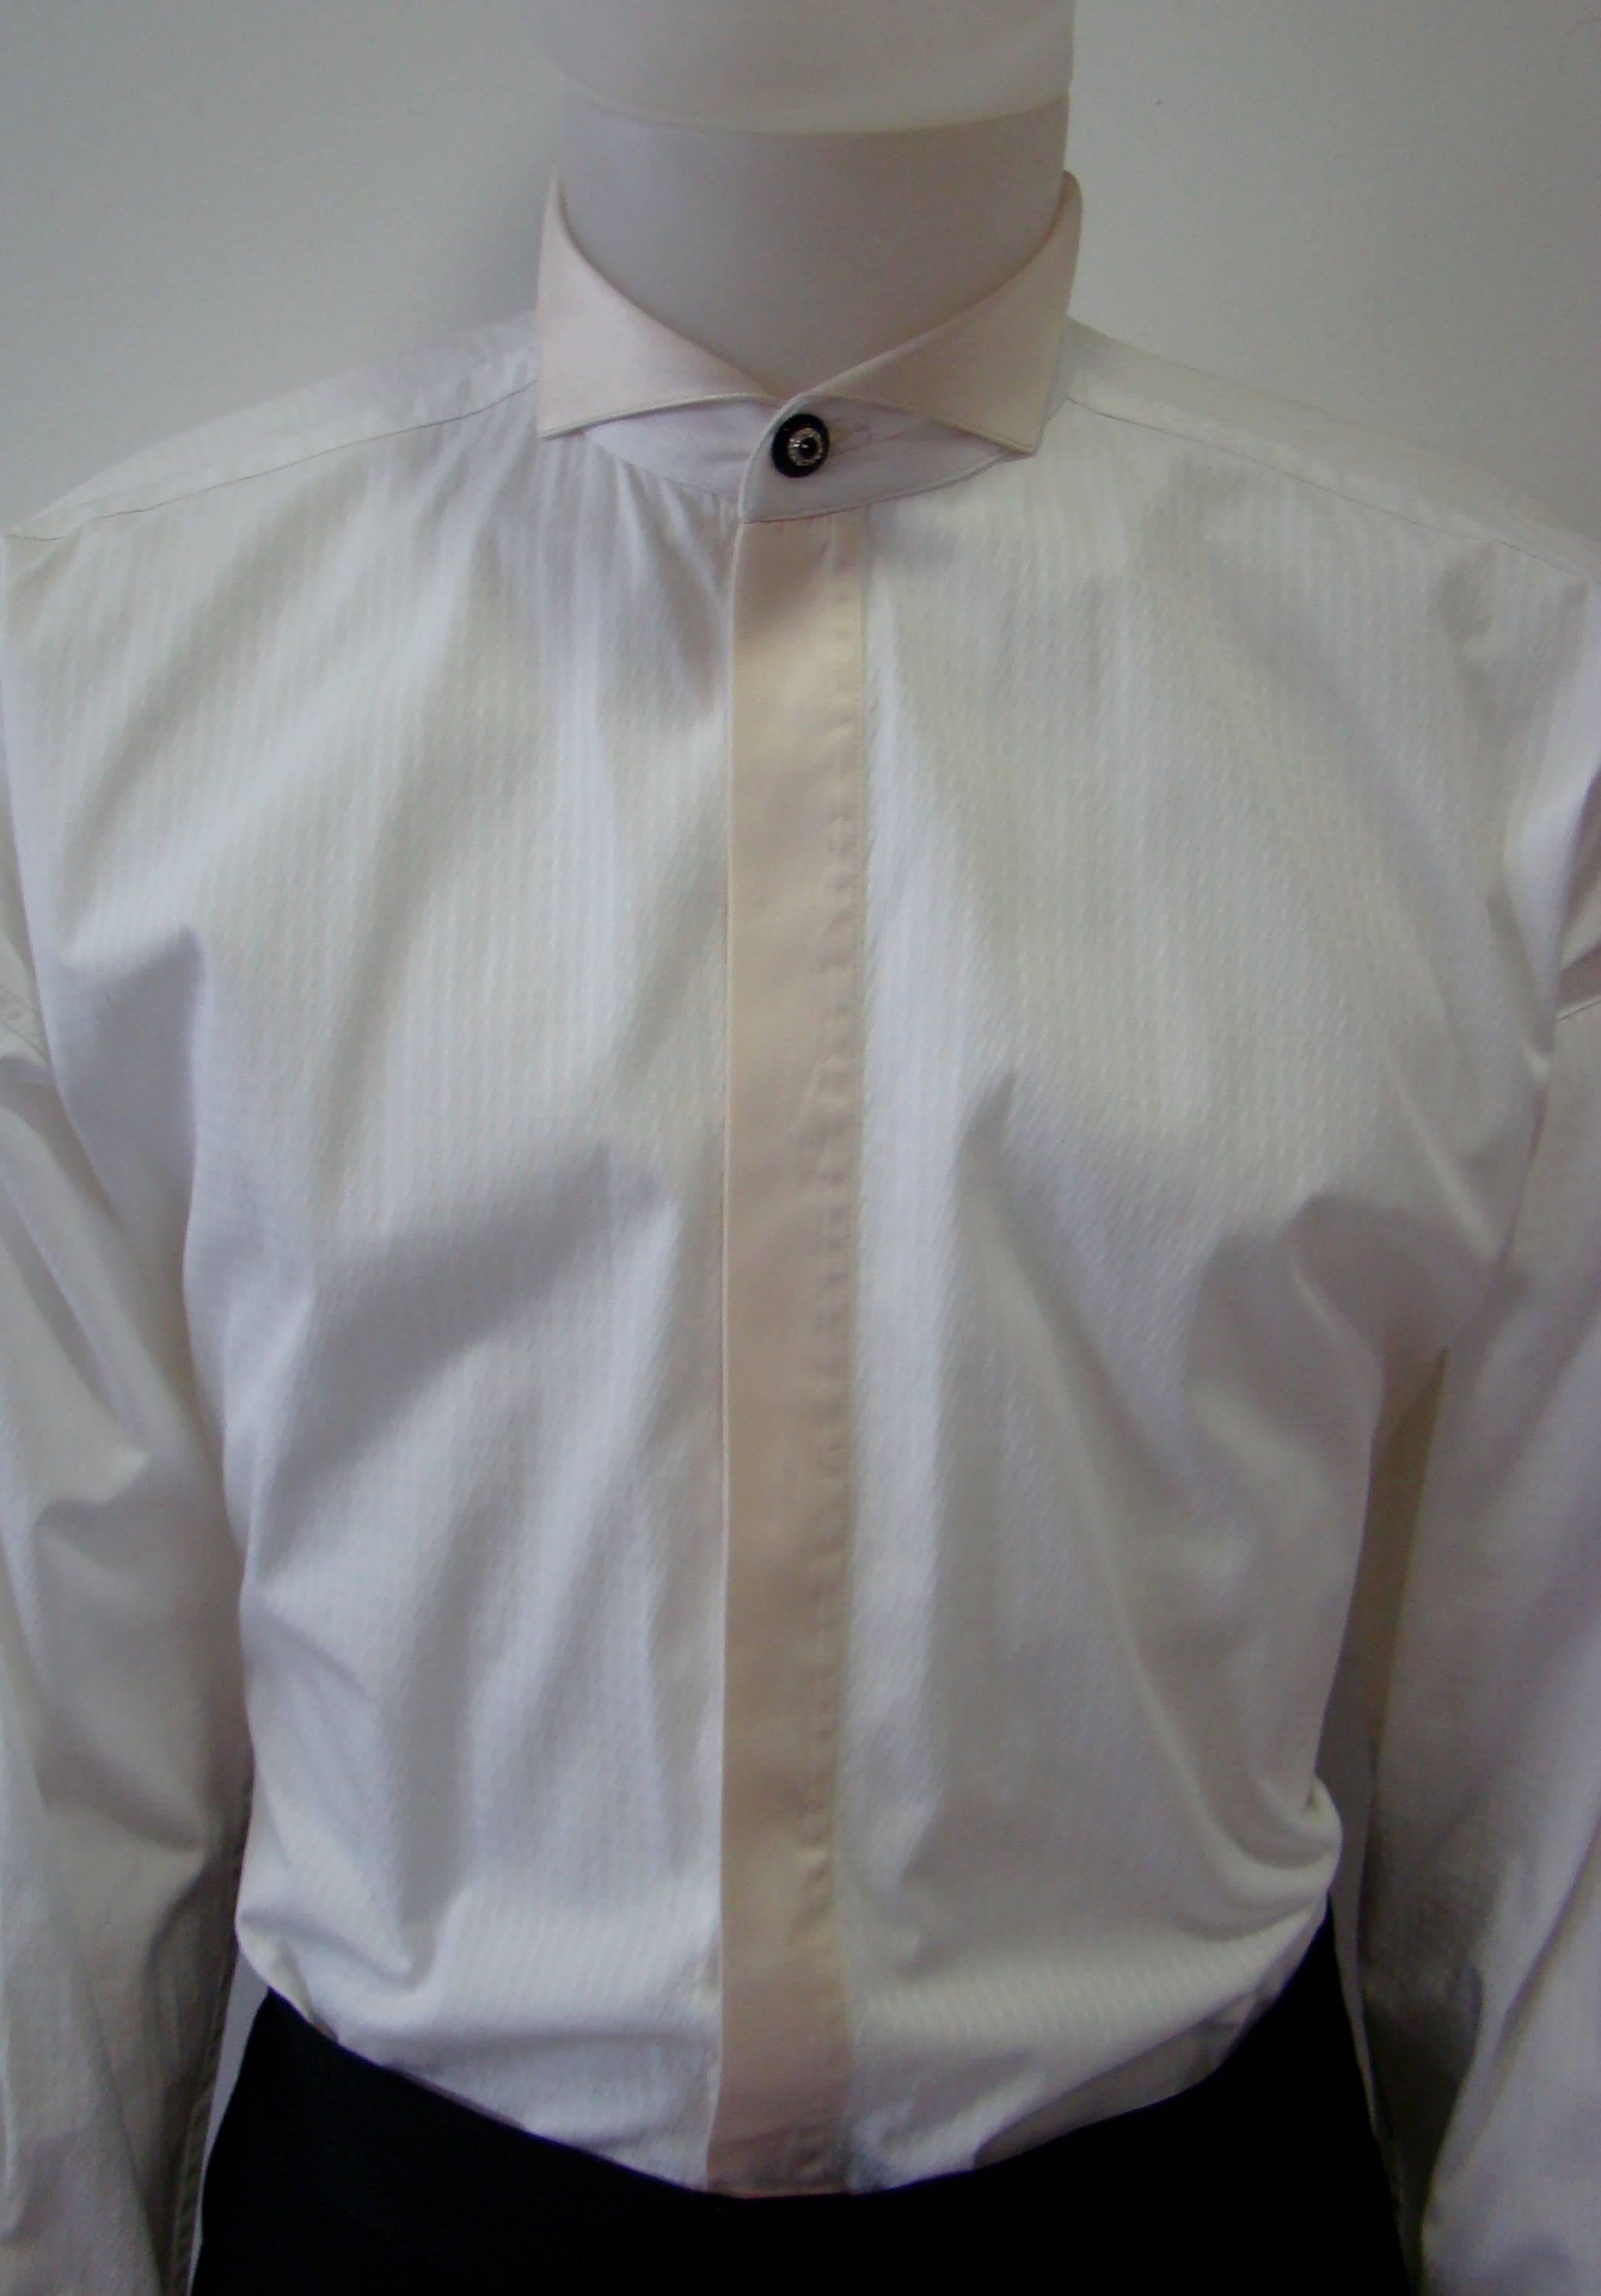 Gianni Versace Tuxedo Evening Shirt Fall 1990 In Excellent Condition For Sale In Athens, Agia Paraskevi